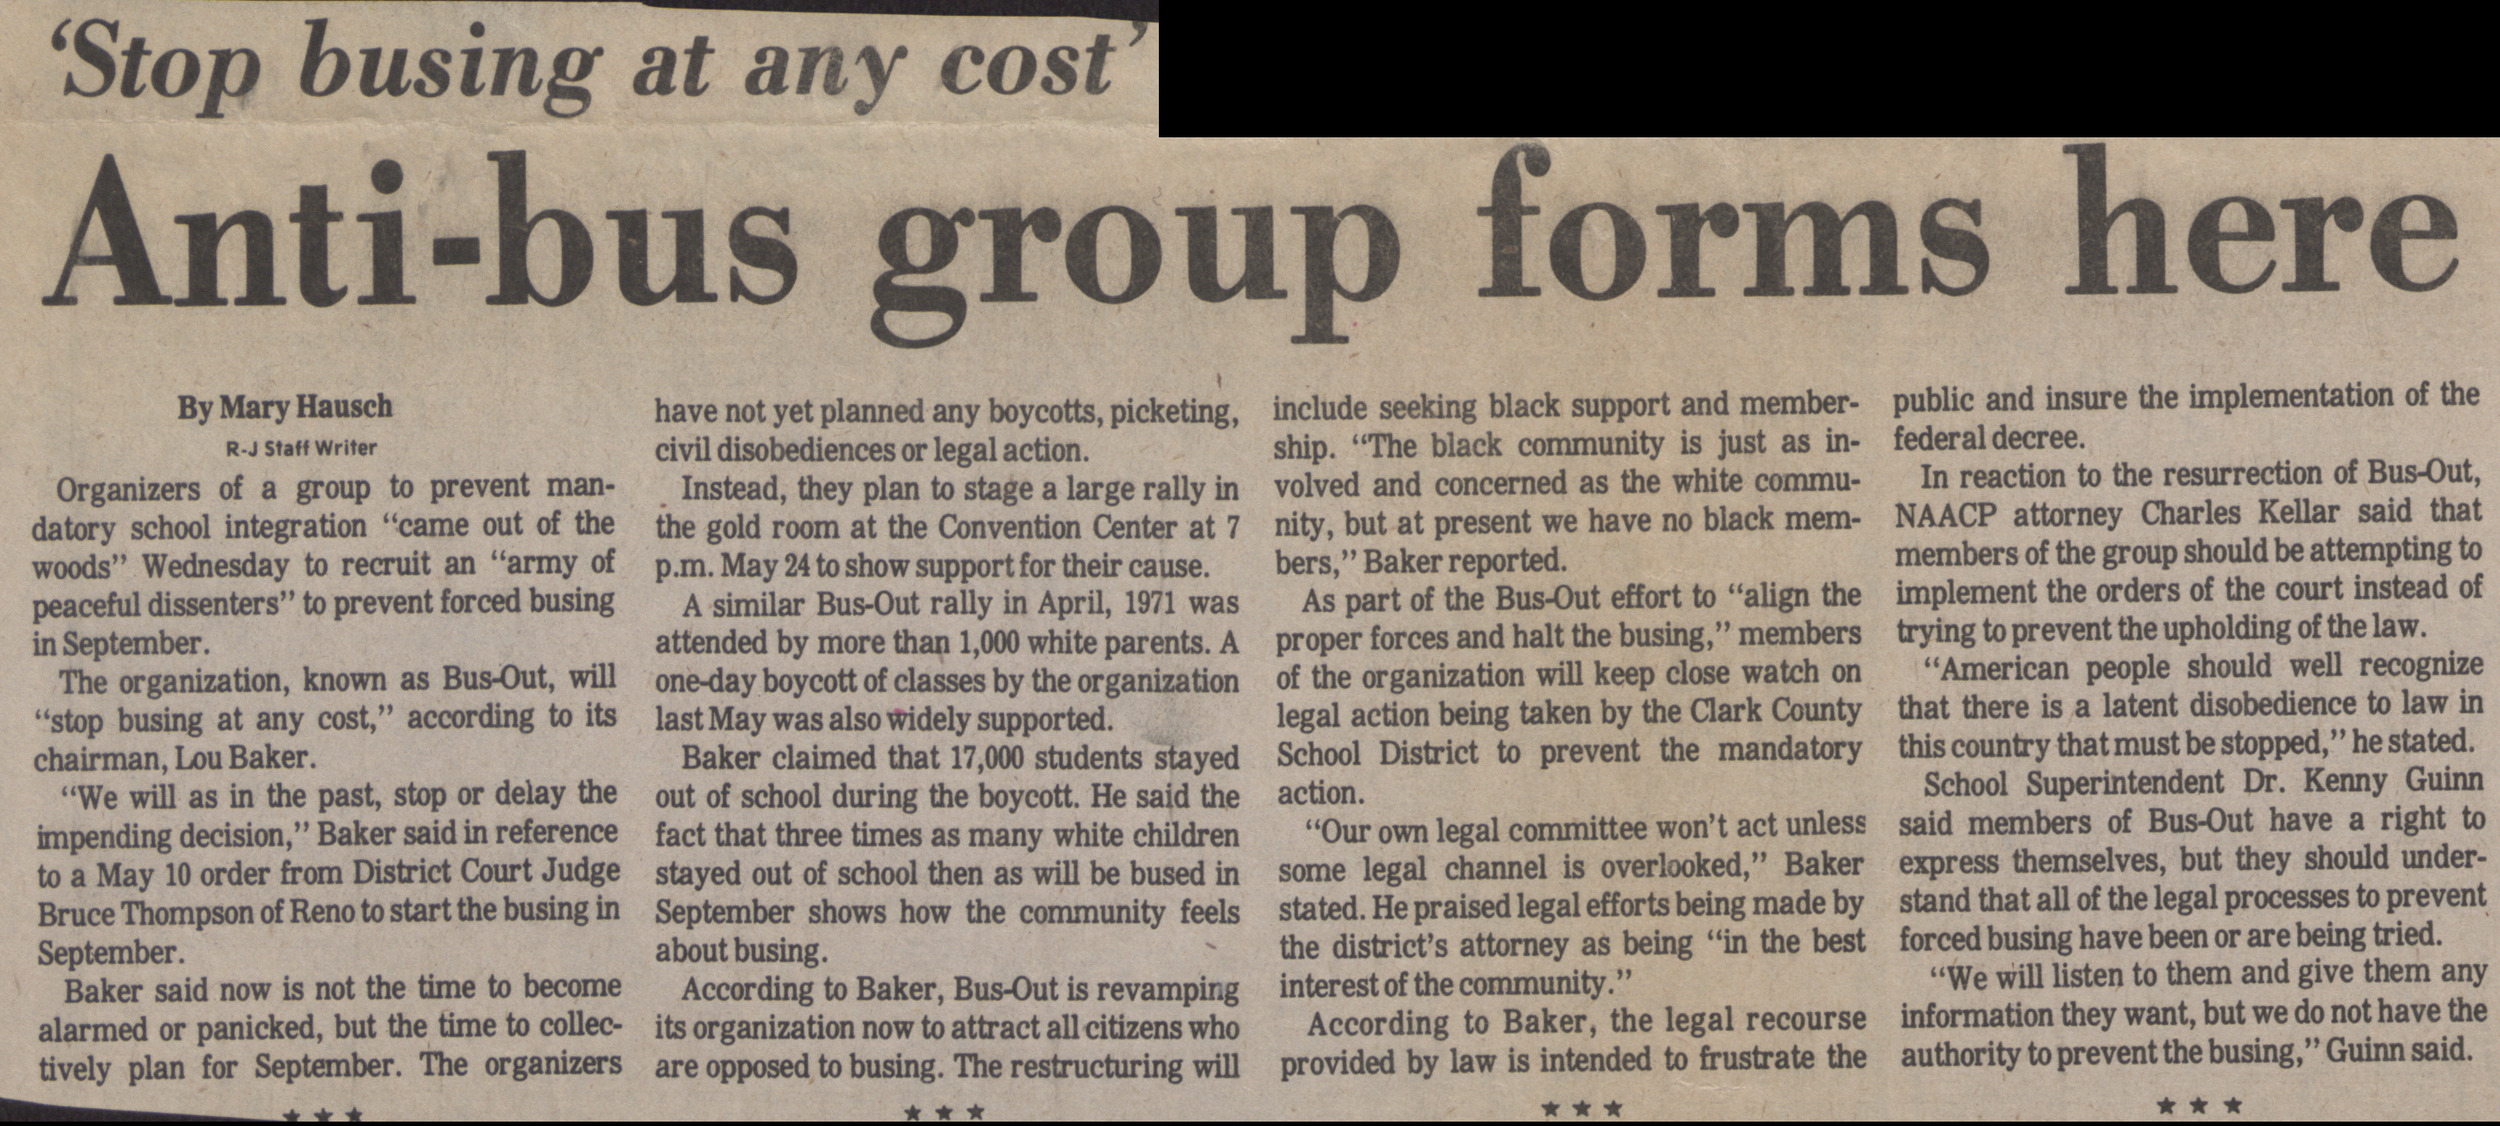 Newspaper clipping, 'Stop busing at any cost' - Anti-bus group forms here, Las Vegas Review-Journal, May 19 (?), 1972